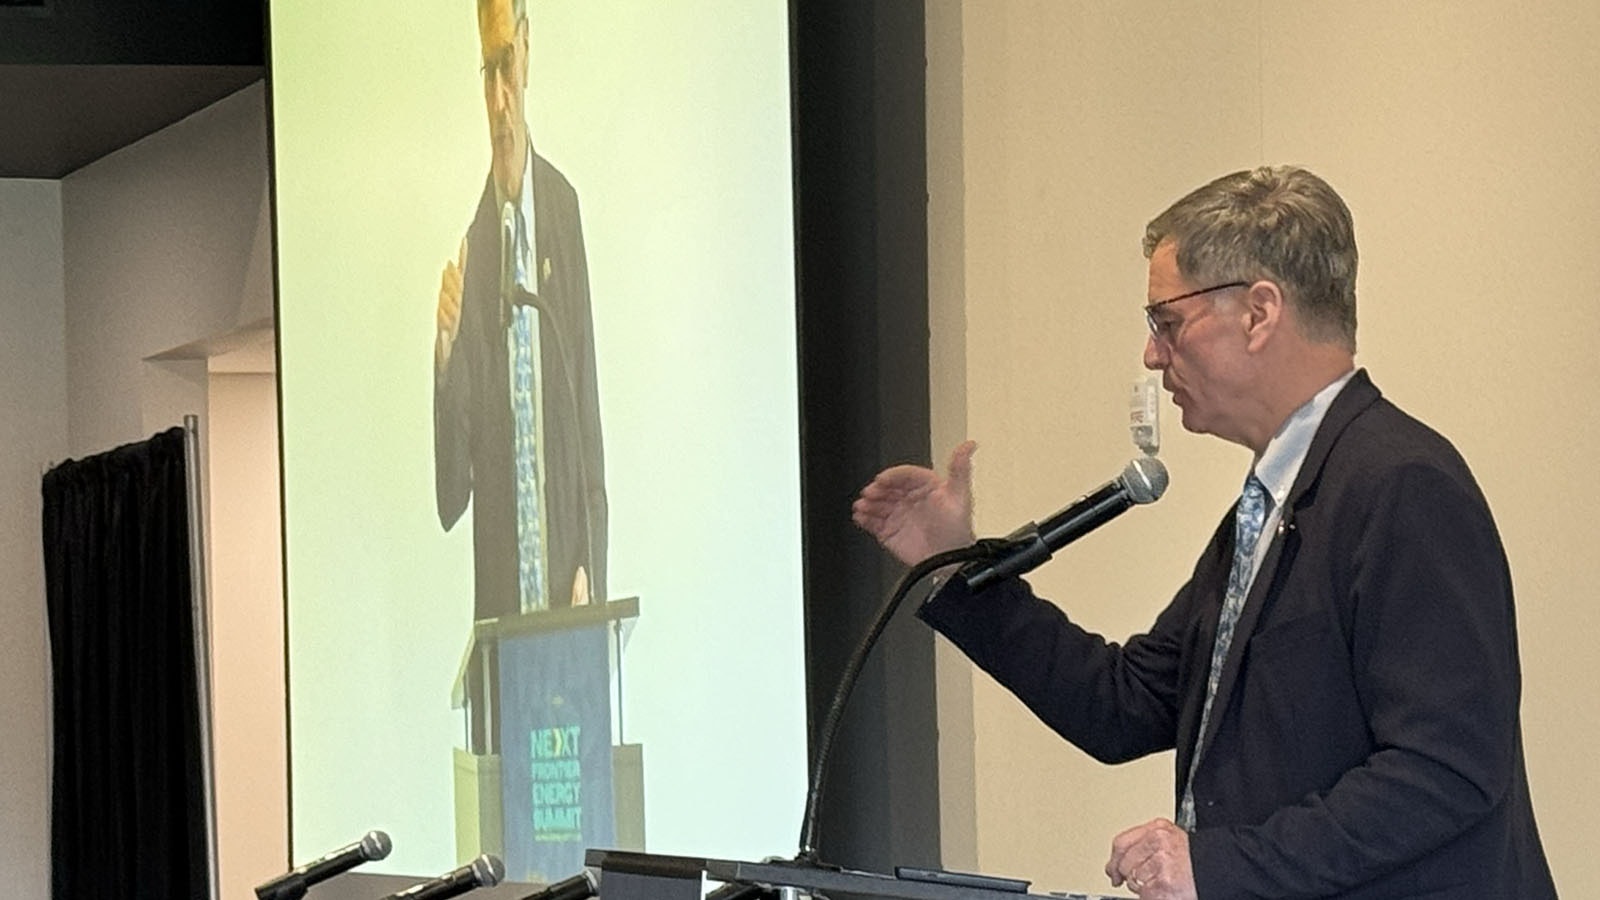 Wyoming Gov. Mark Gordon speaks at an energy summit in Cheyenne on Wednesday where he vowed to fight the federal government’s new regulations designed to limit coal and oil and gas production.